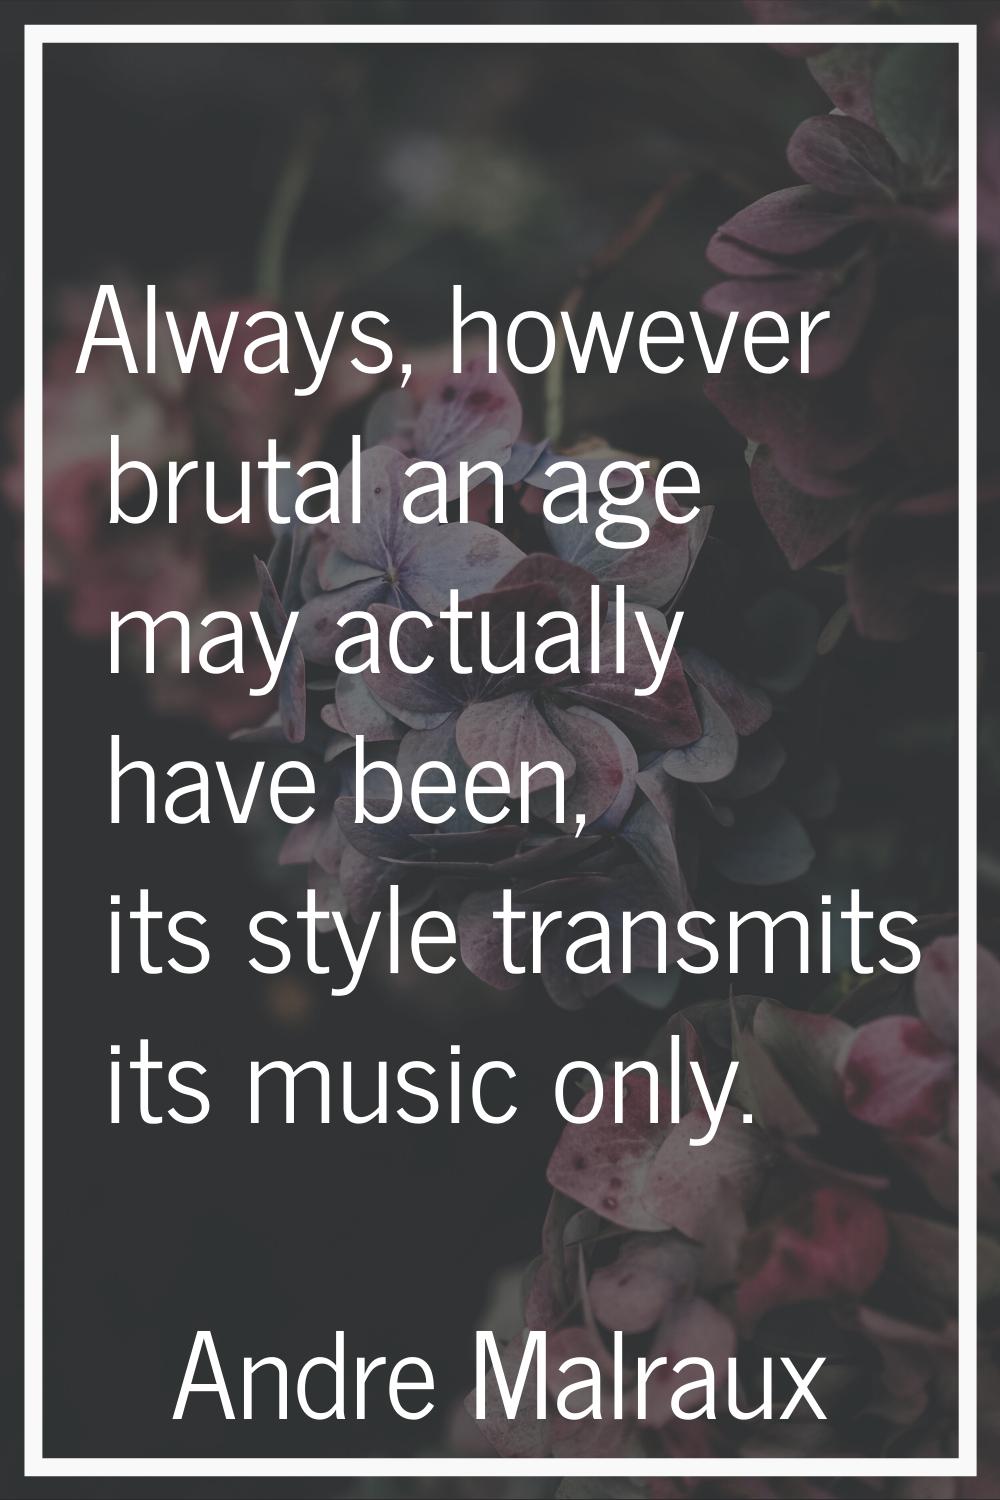 Always, however brutal an age may actually have been, its style transmits its music only.